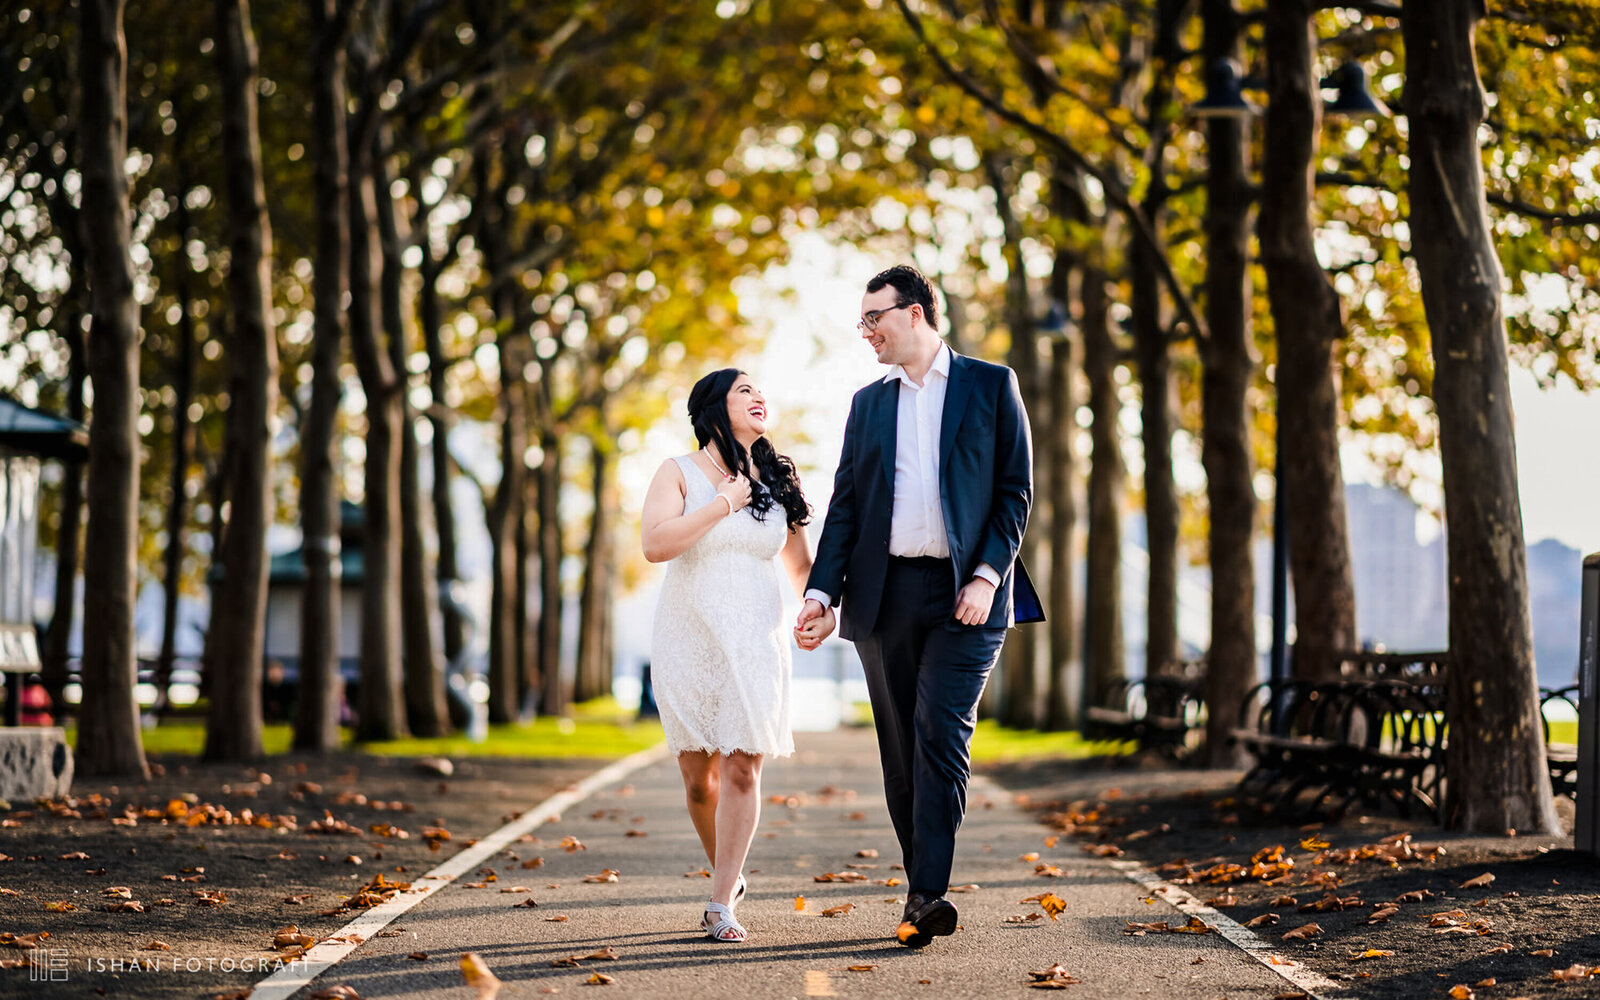 Capture your Hudson County, NJ engagement with timeless photos.